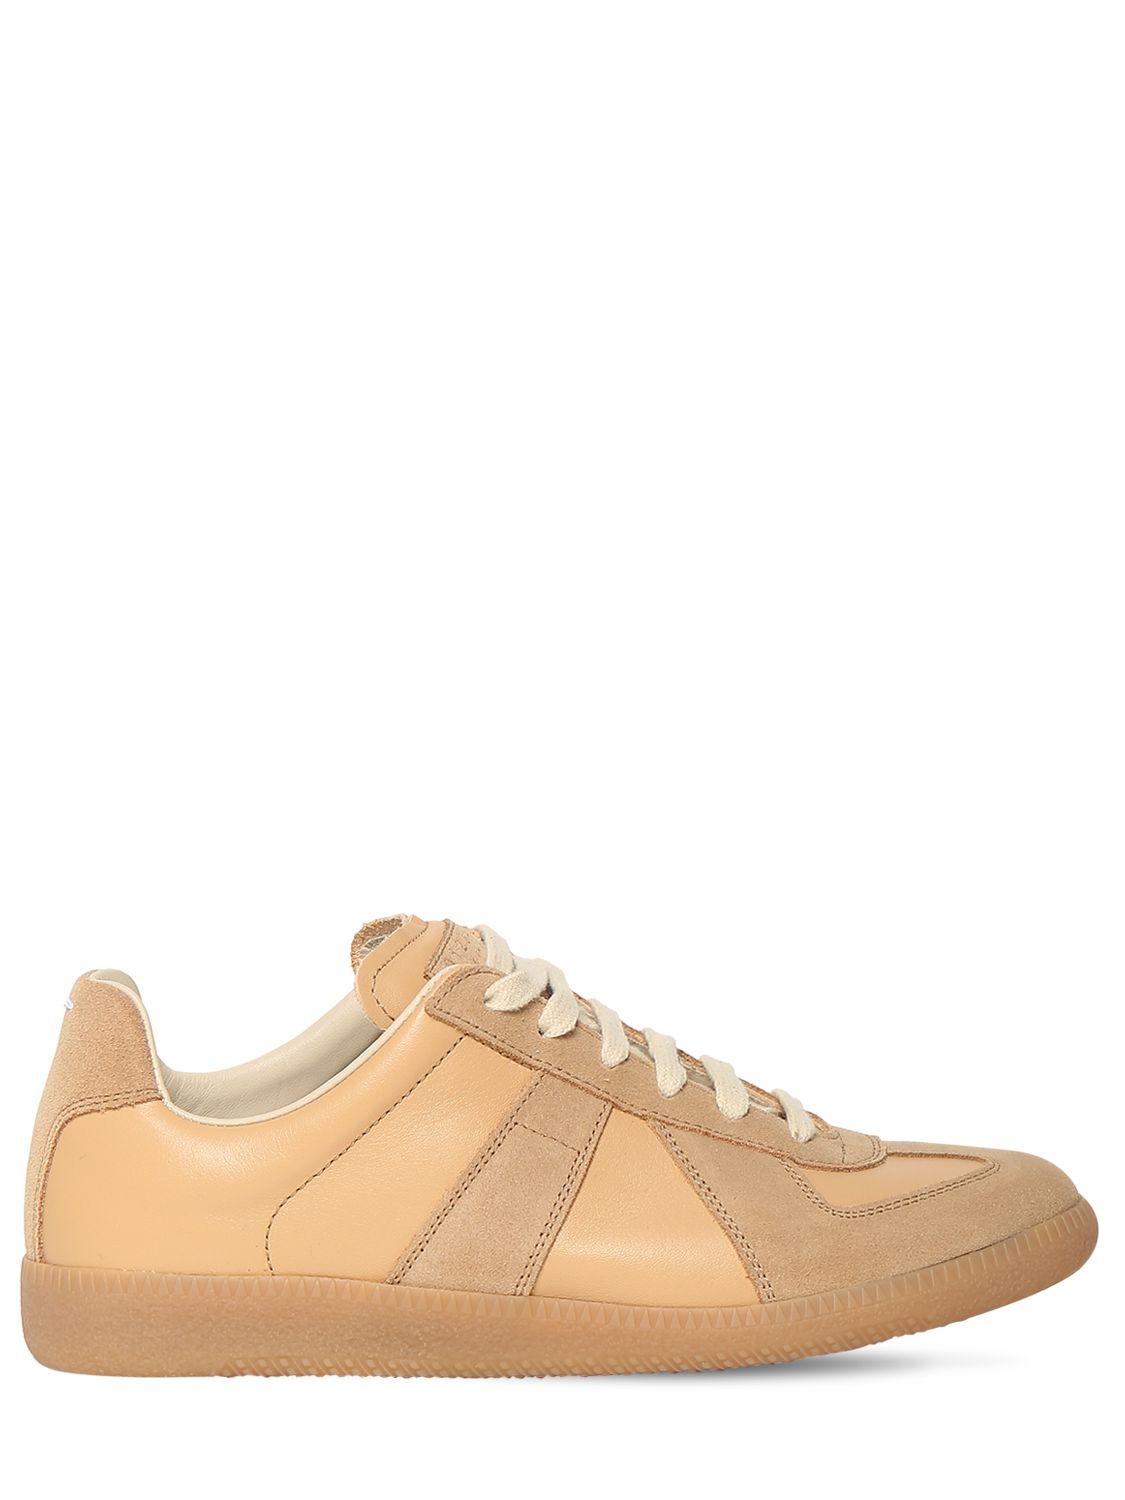 Maison Margiela Replica Mixed Leather Low-top Sneakers In Beige